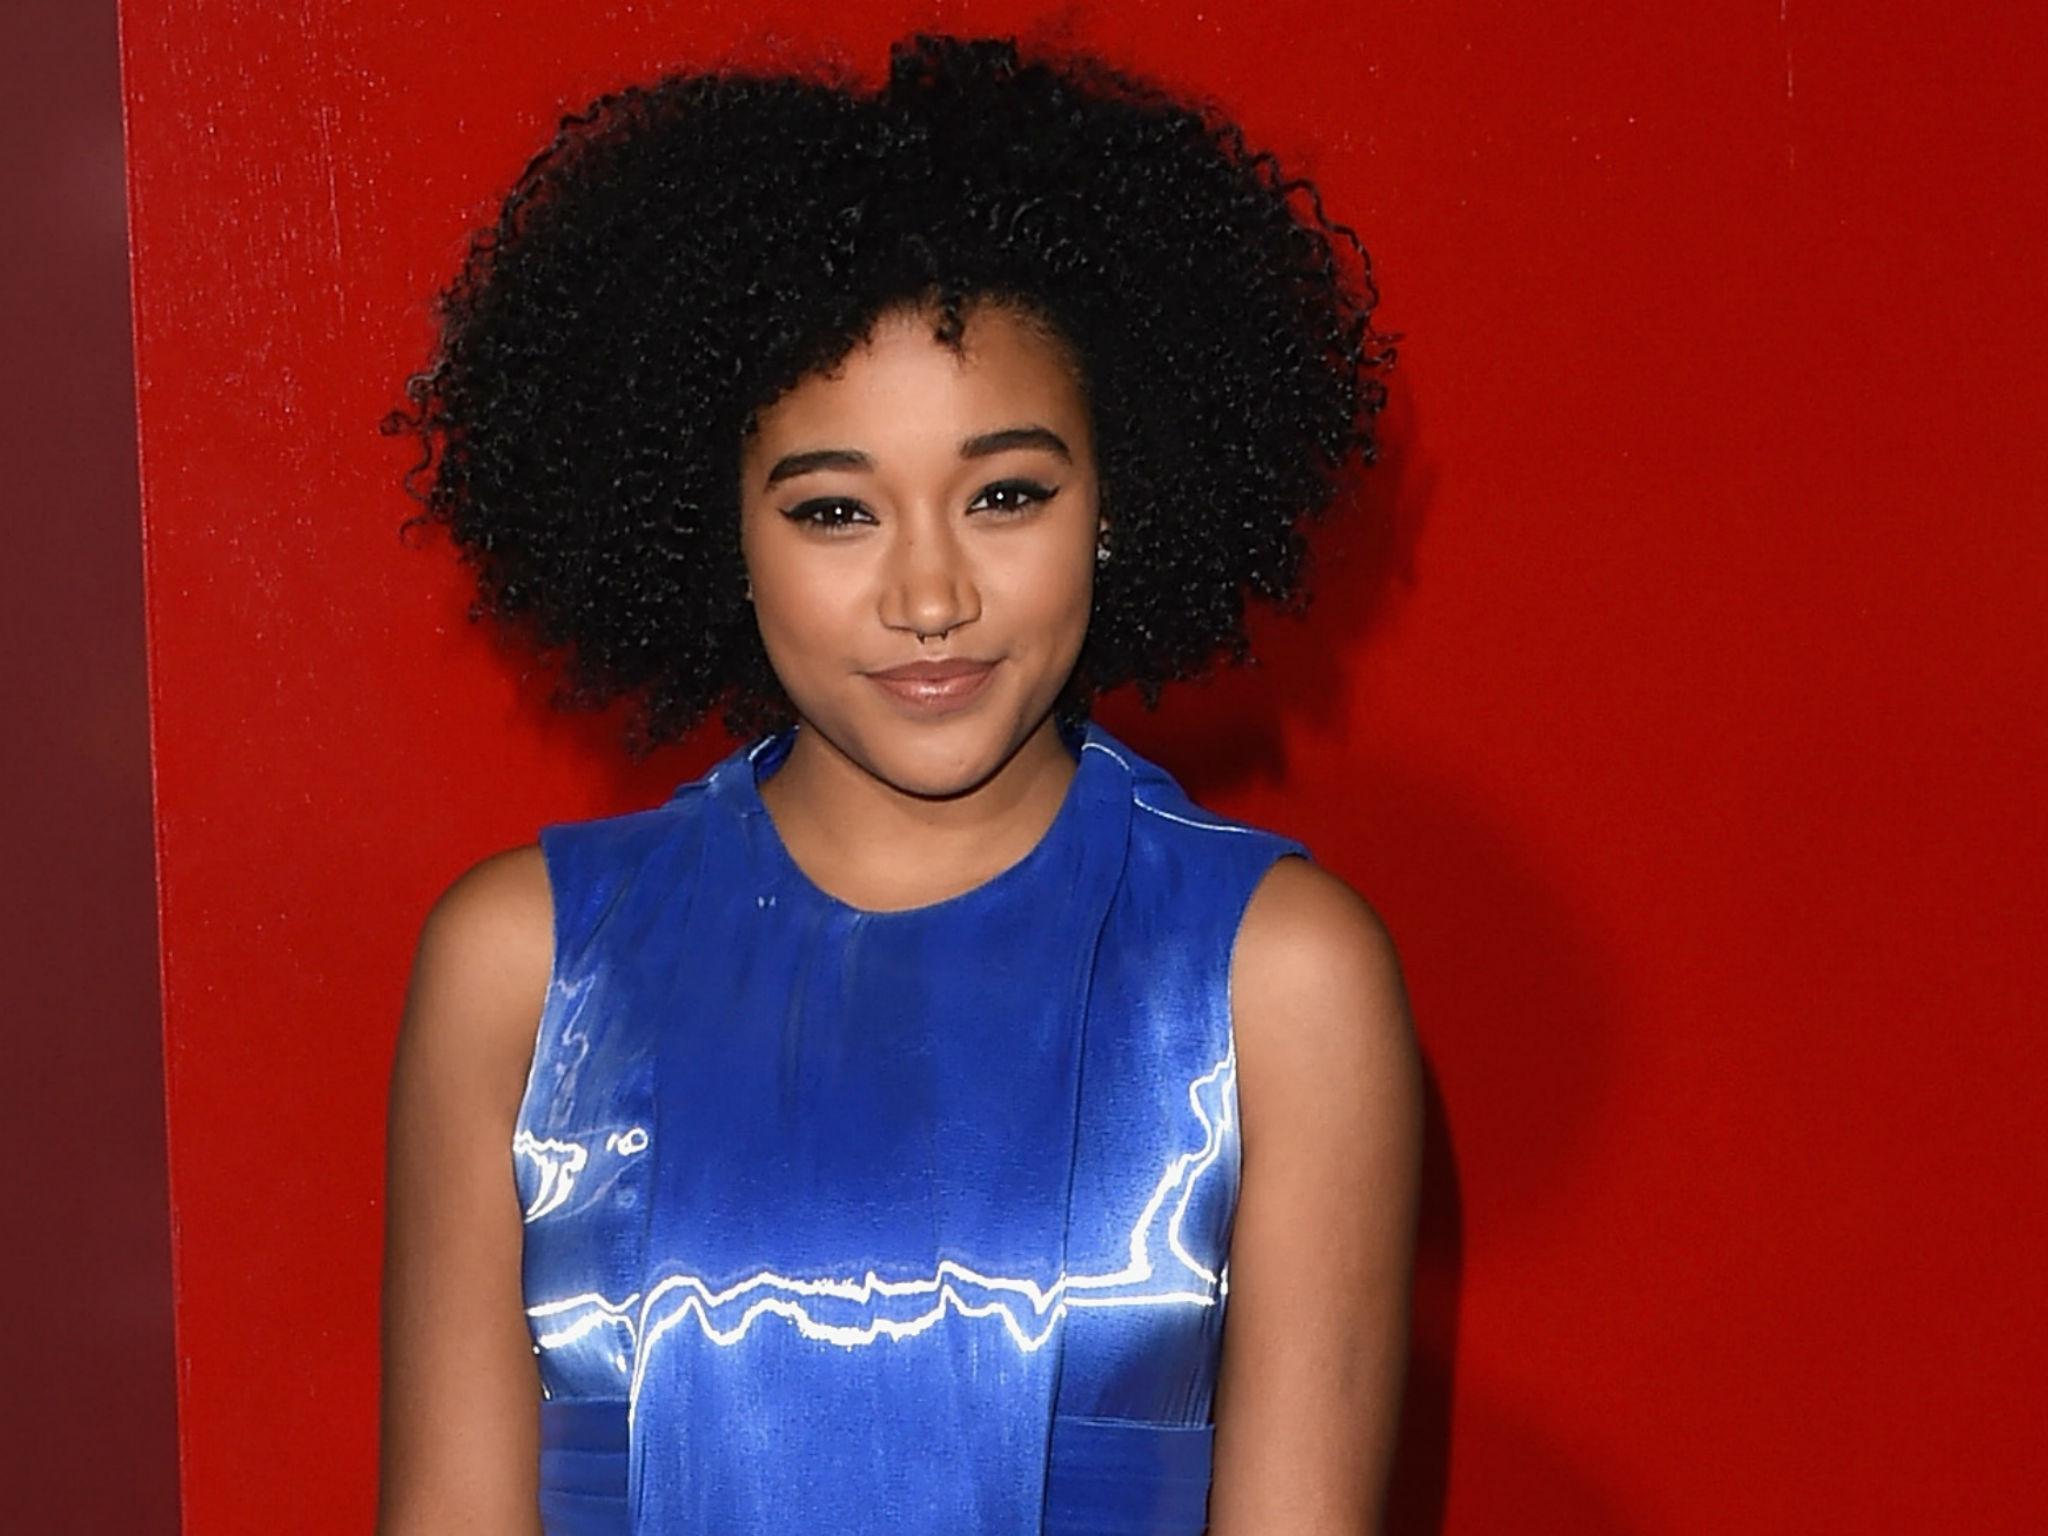 Amandla Stenberg announces her bisexuality in video discussing